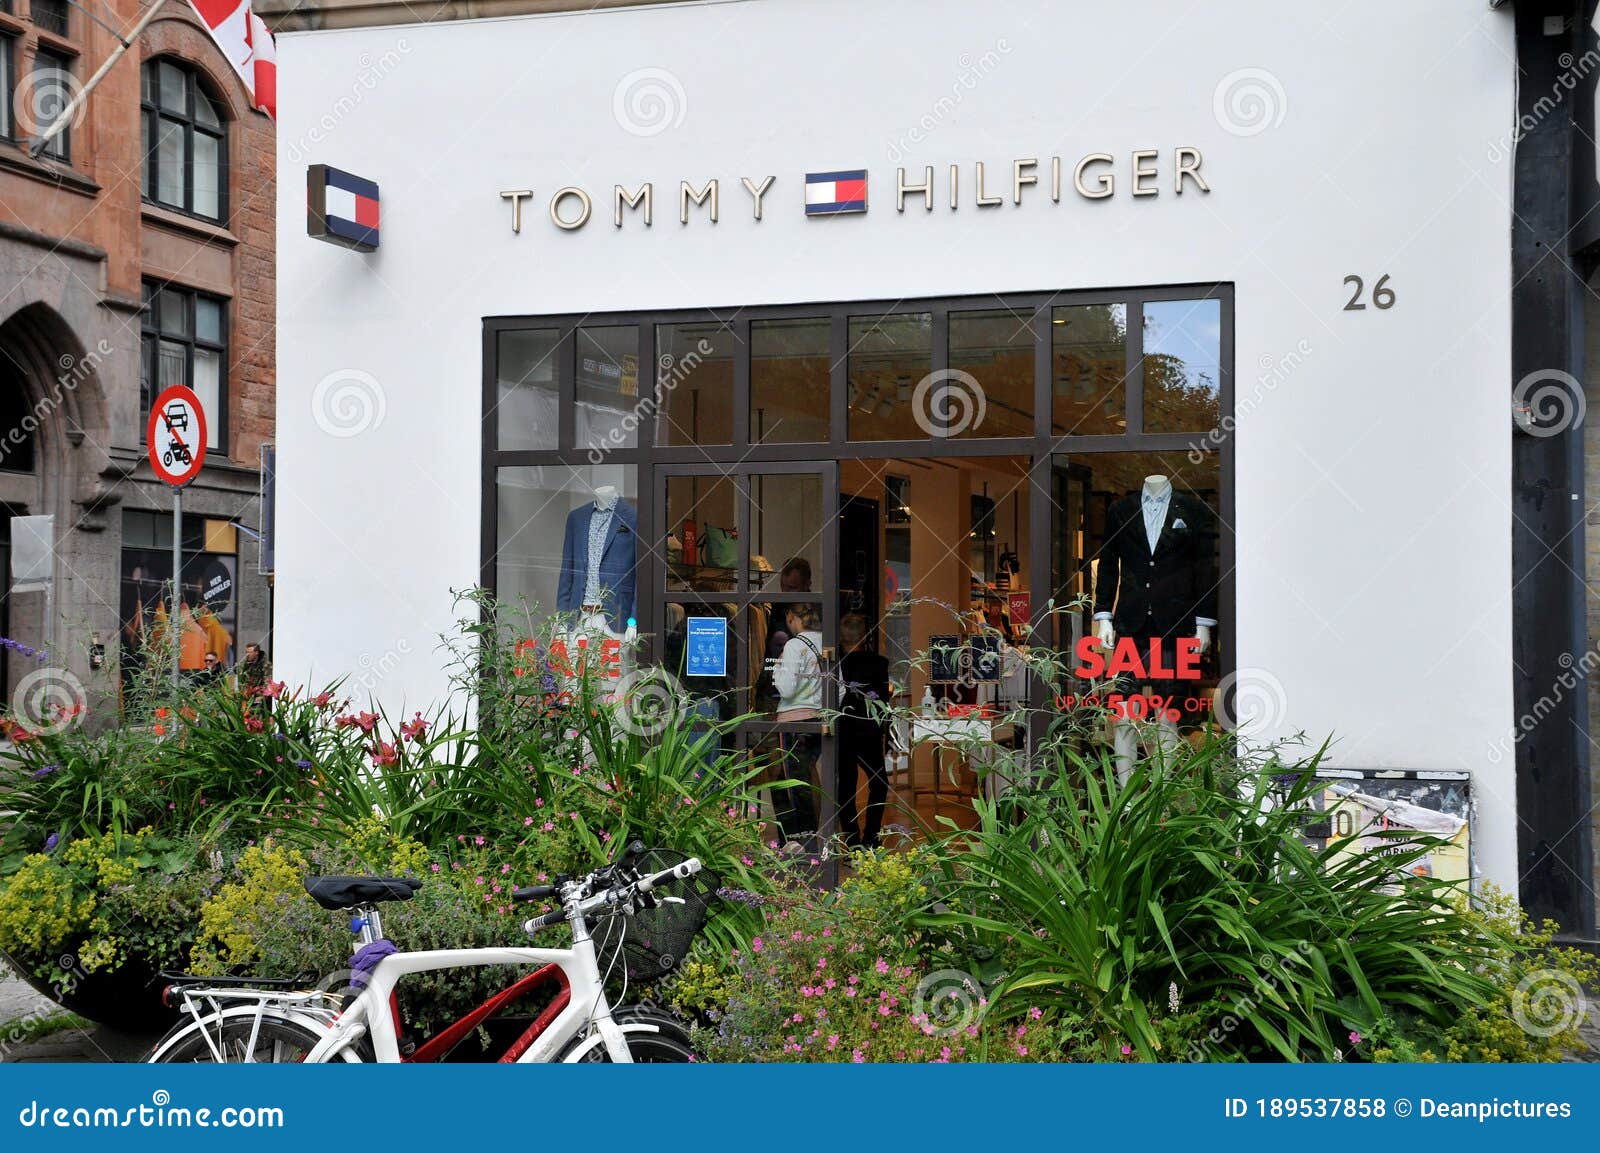 I'm sorry pipe Orient 50 Off Sale at Tommy Hilfiger Store in Copenhagen Denmark Editorial Stock  Photo - Image of covid10, business: 189537858